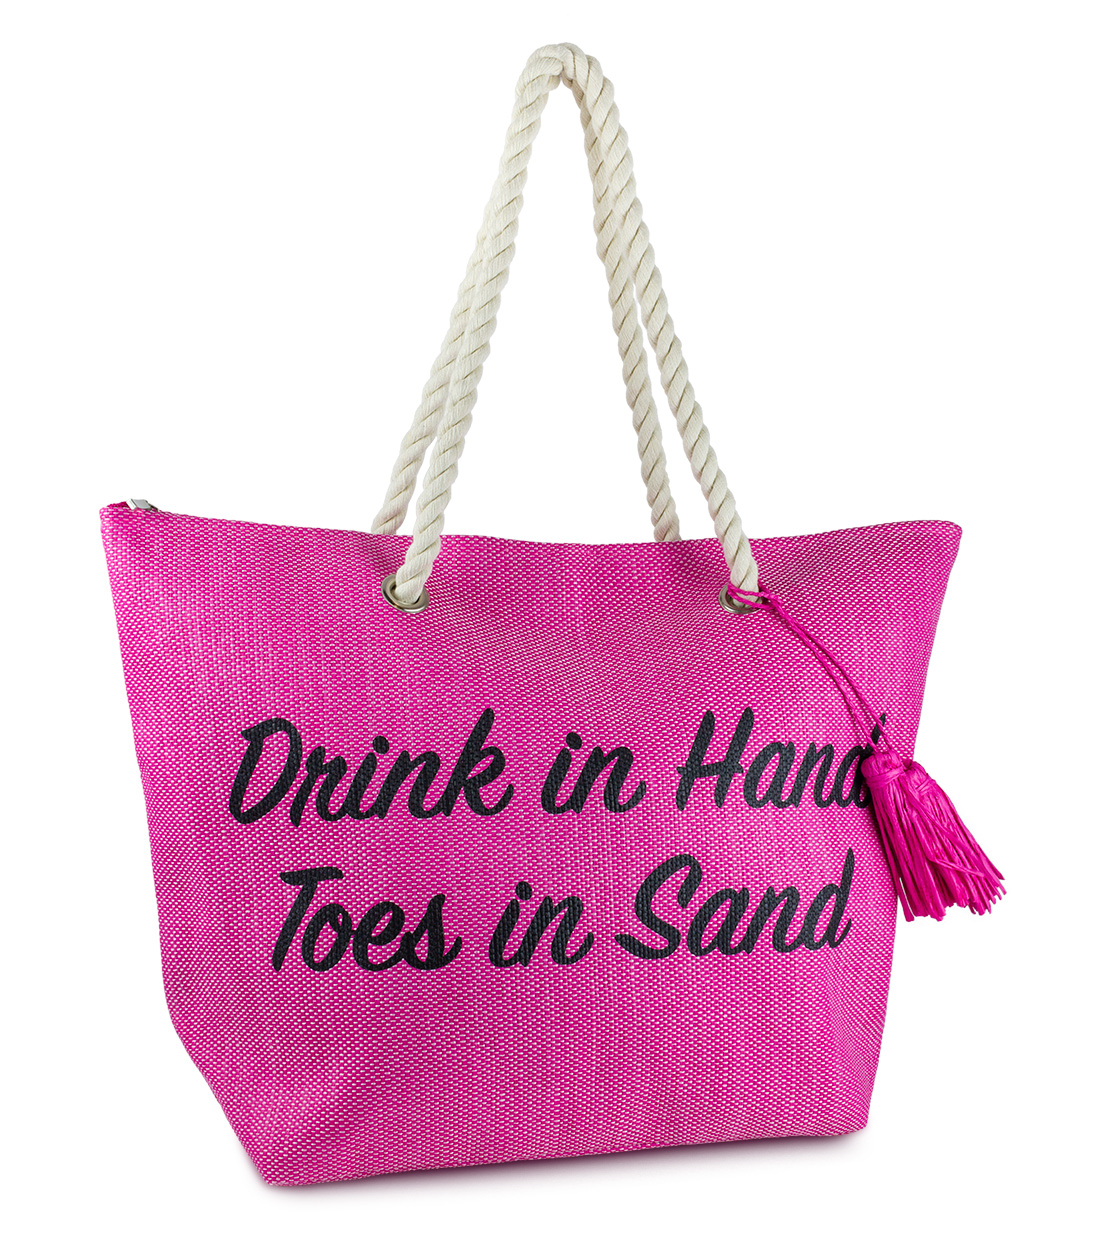 Women's Fuchsia Drink In Hand toes In Sand Straw Beach tote Bag with Tassel and Double Rope Handle - image 1 of 1